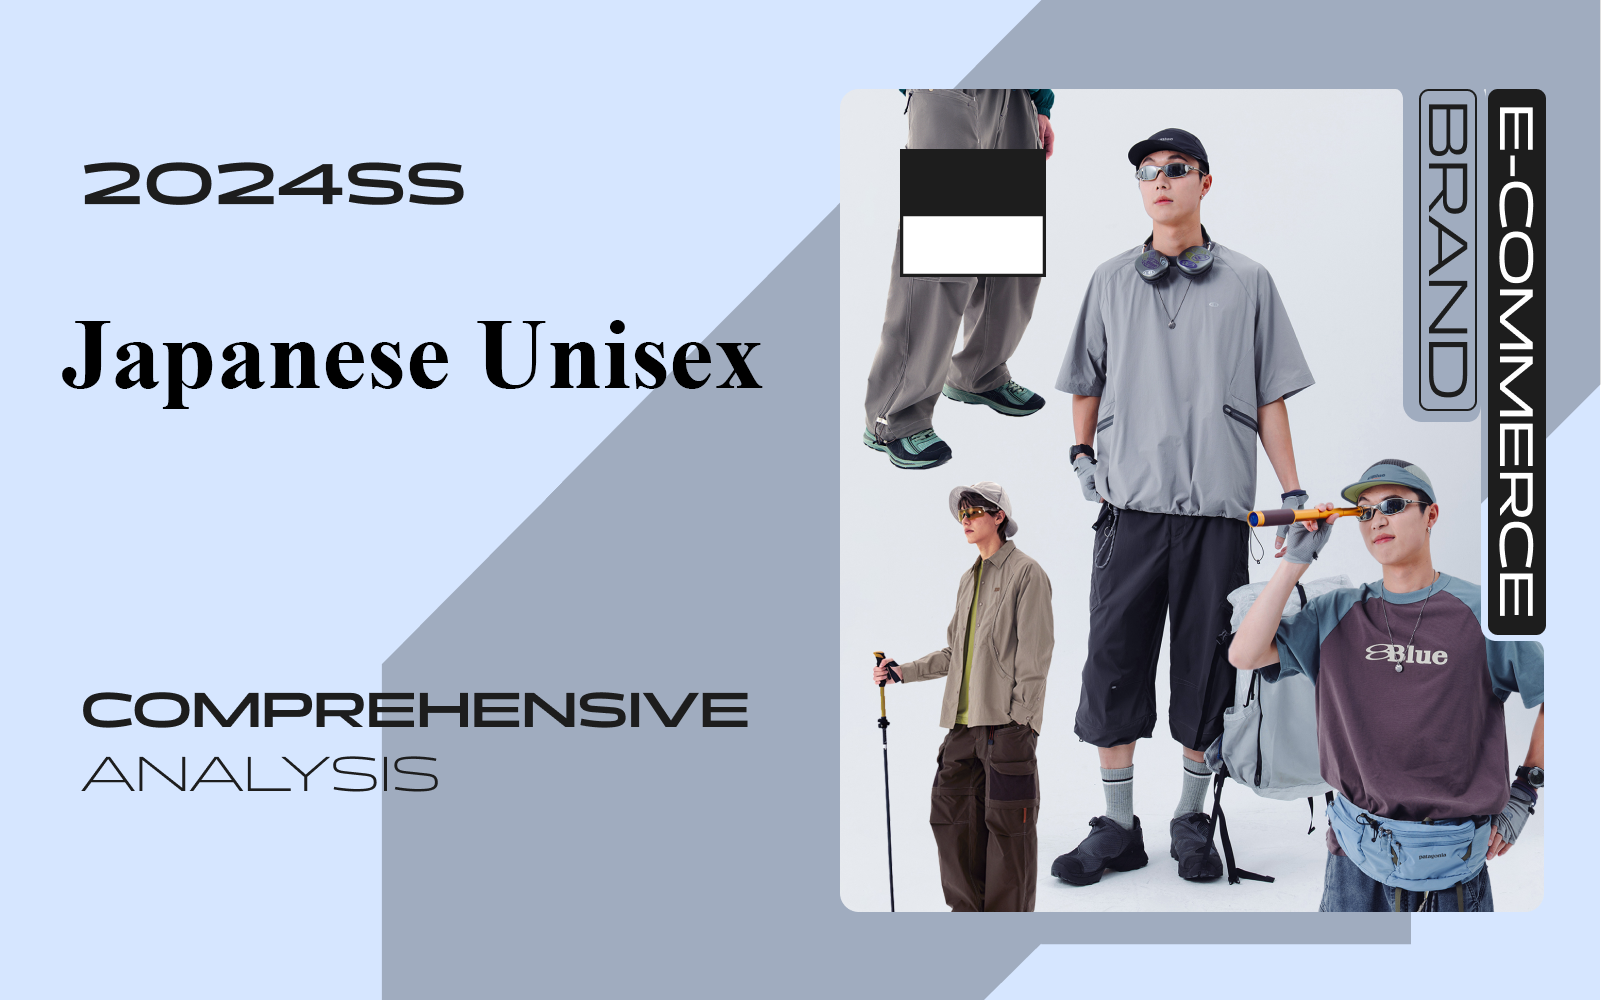 Japanese Unisex -- The Comprehensive Analysis of Menswear E-Commerce